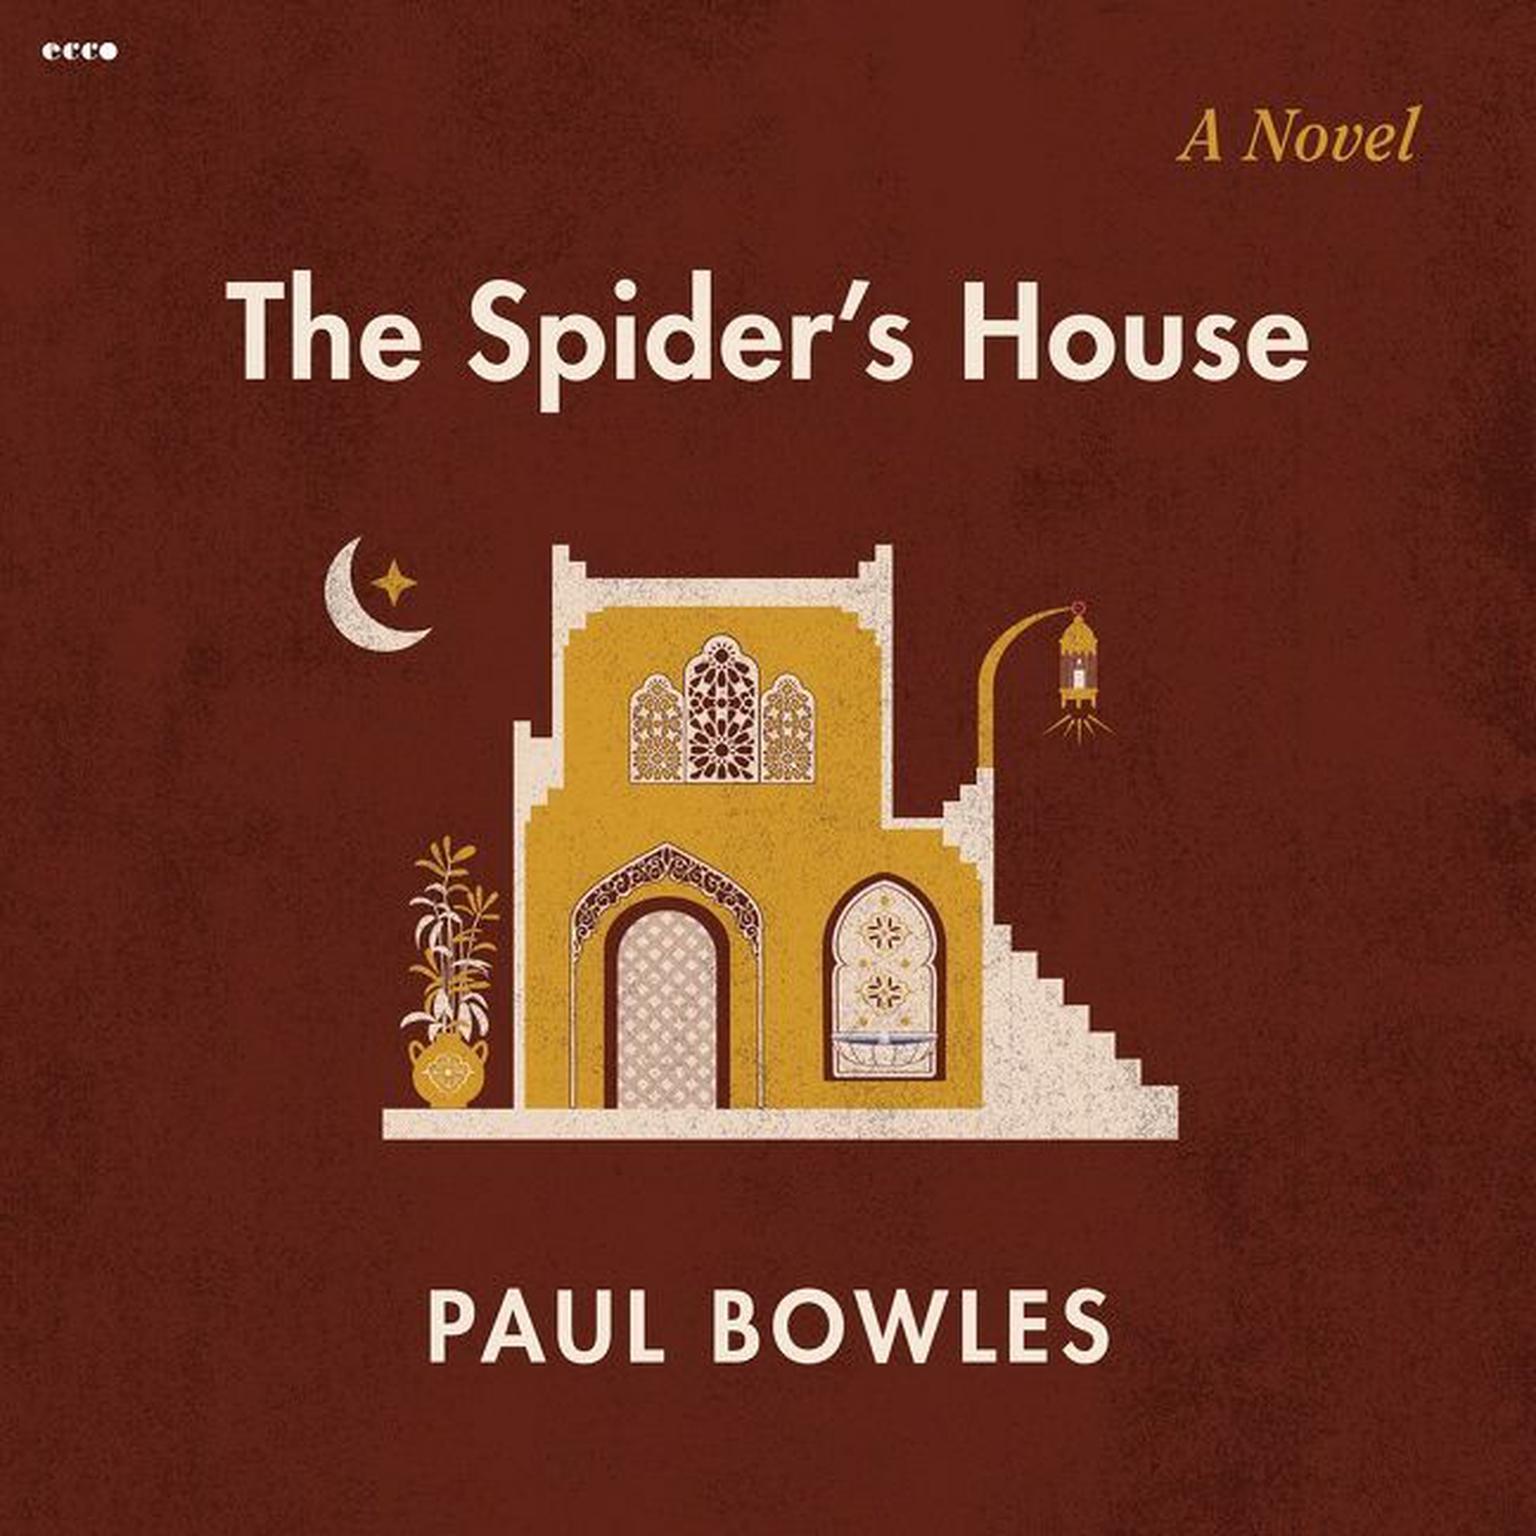 The Spiders House: A Novel Audiobook, by Paul Bowles